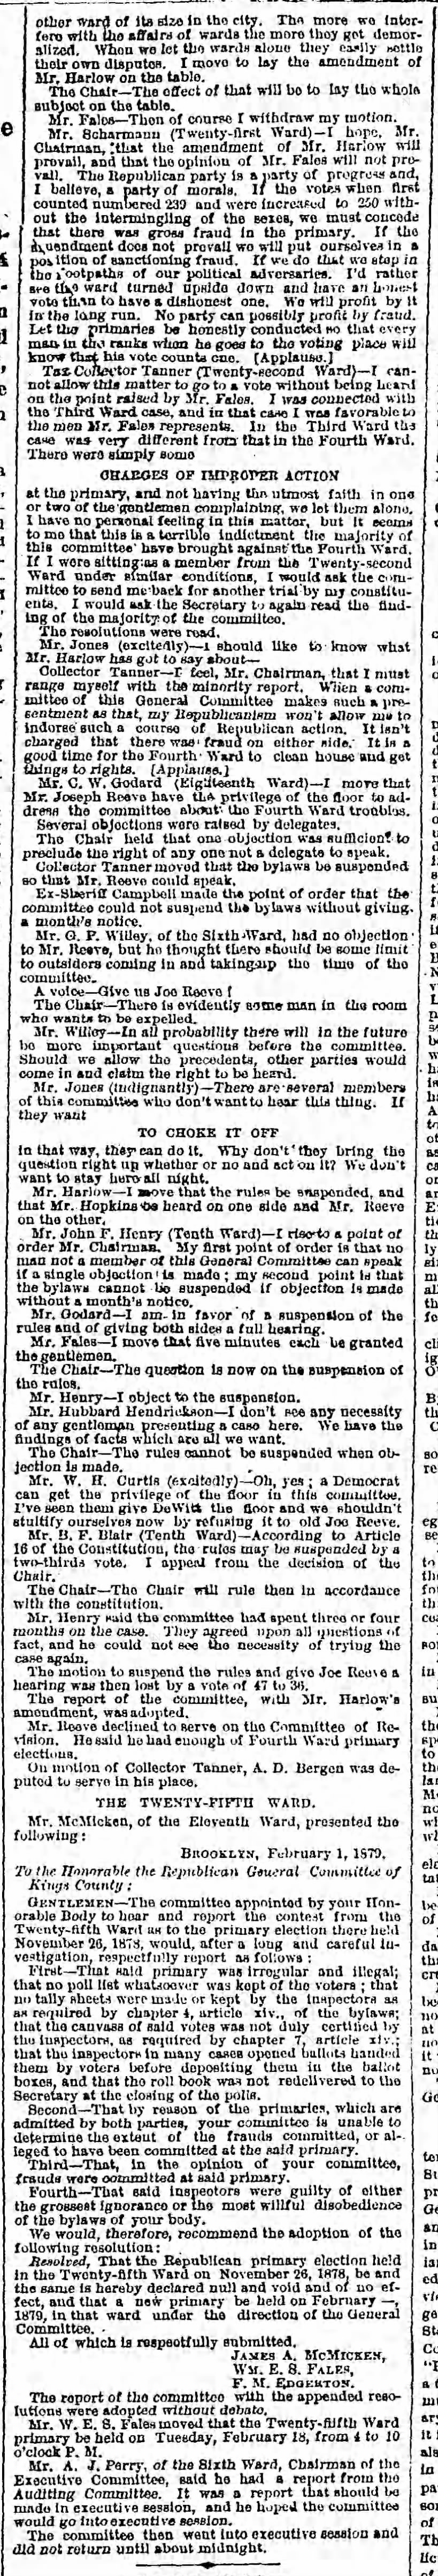 February 5, 1879, page 2 part 2